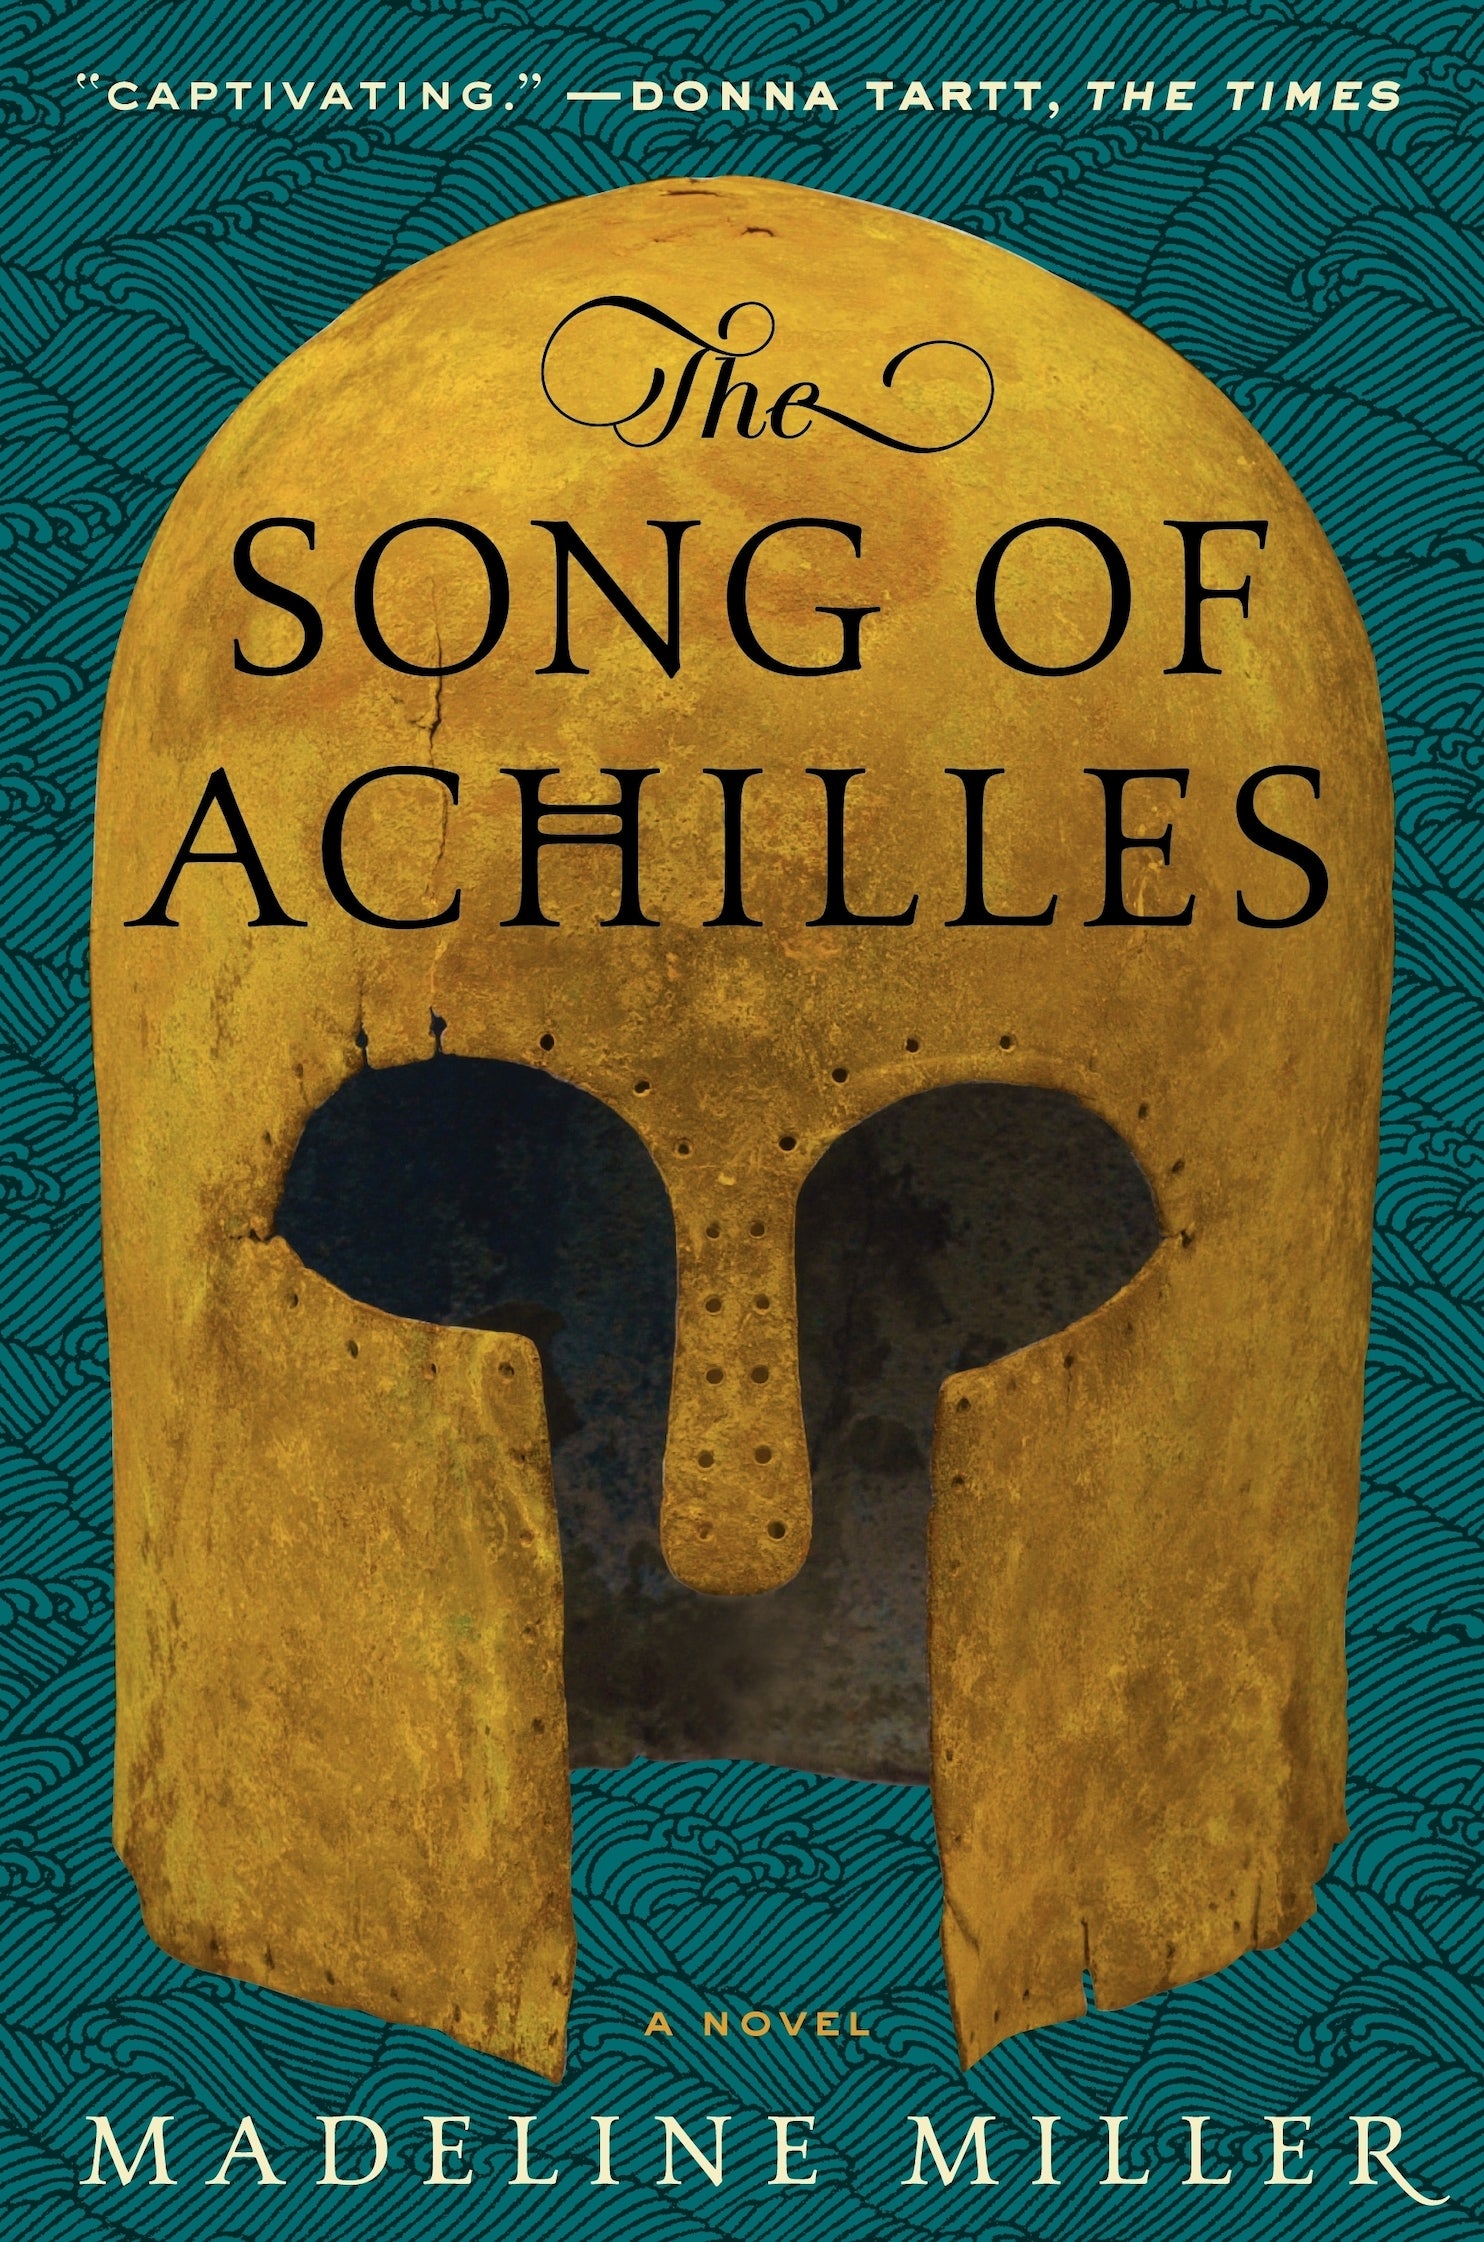 Madeline Miller's The Song Of Achilles